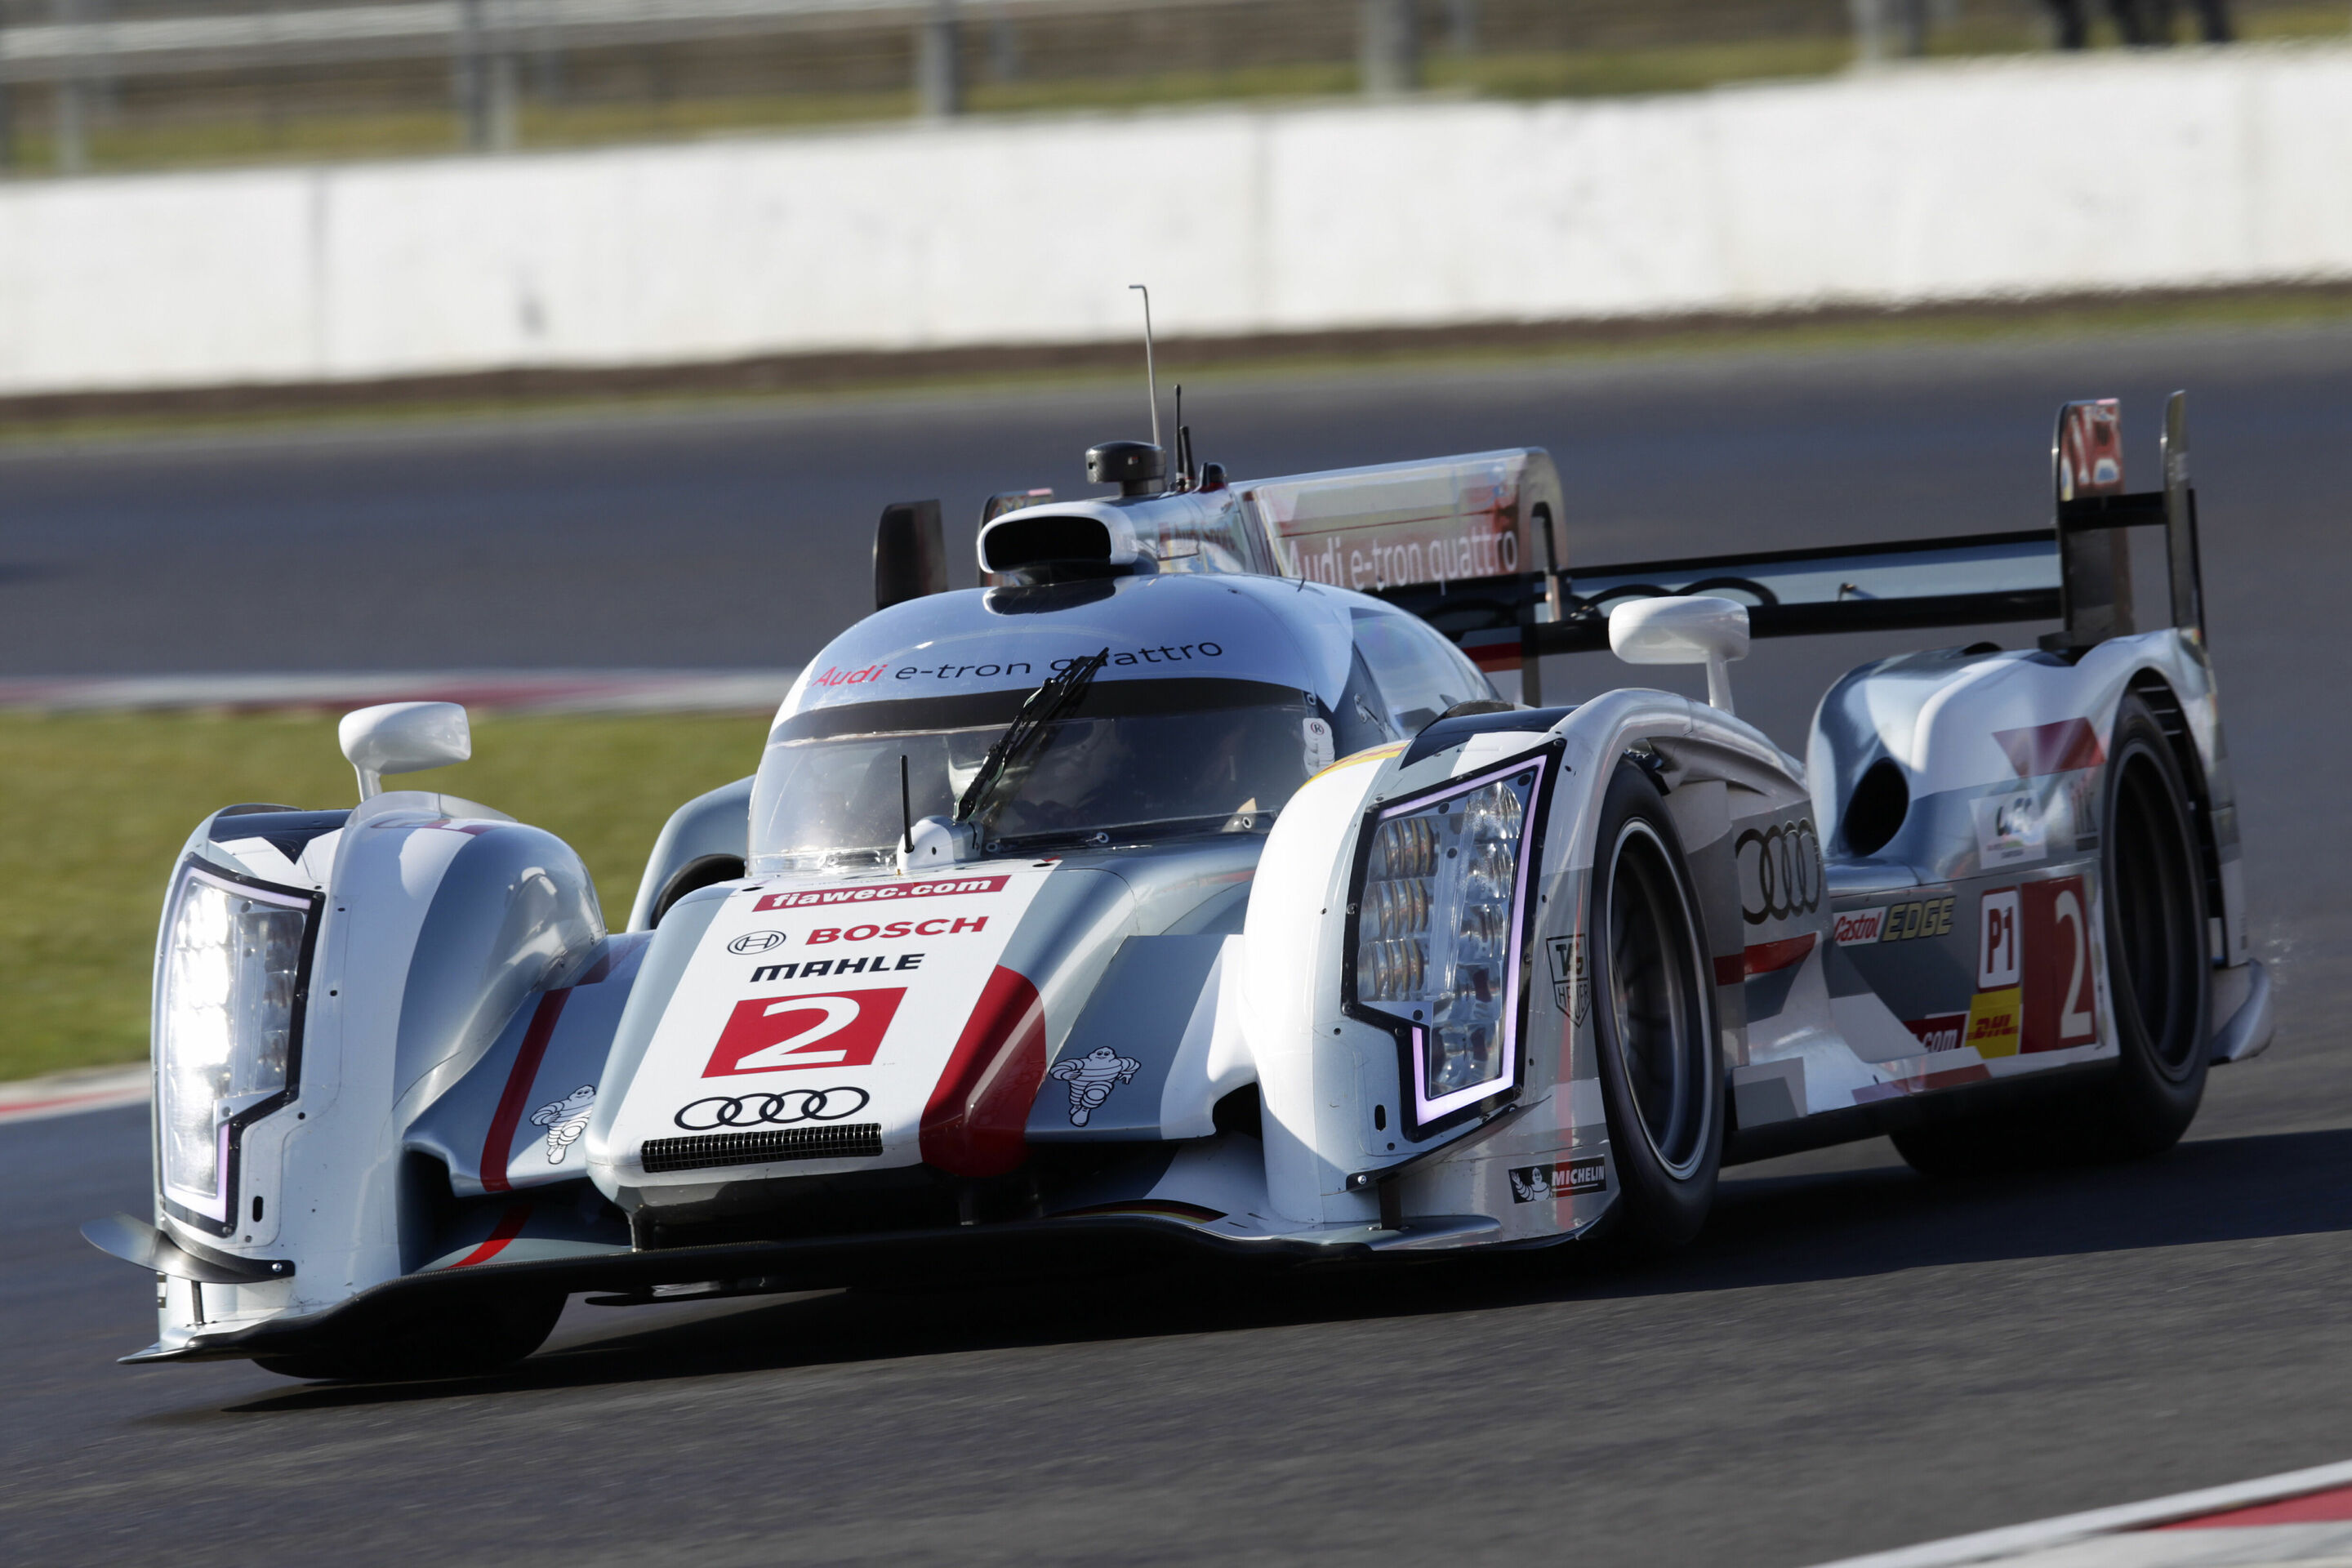 Audi in WEC opener at Silverstone on second and third rows of the grid